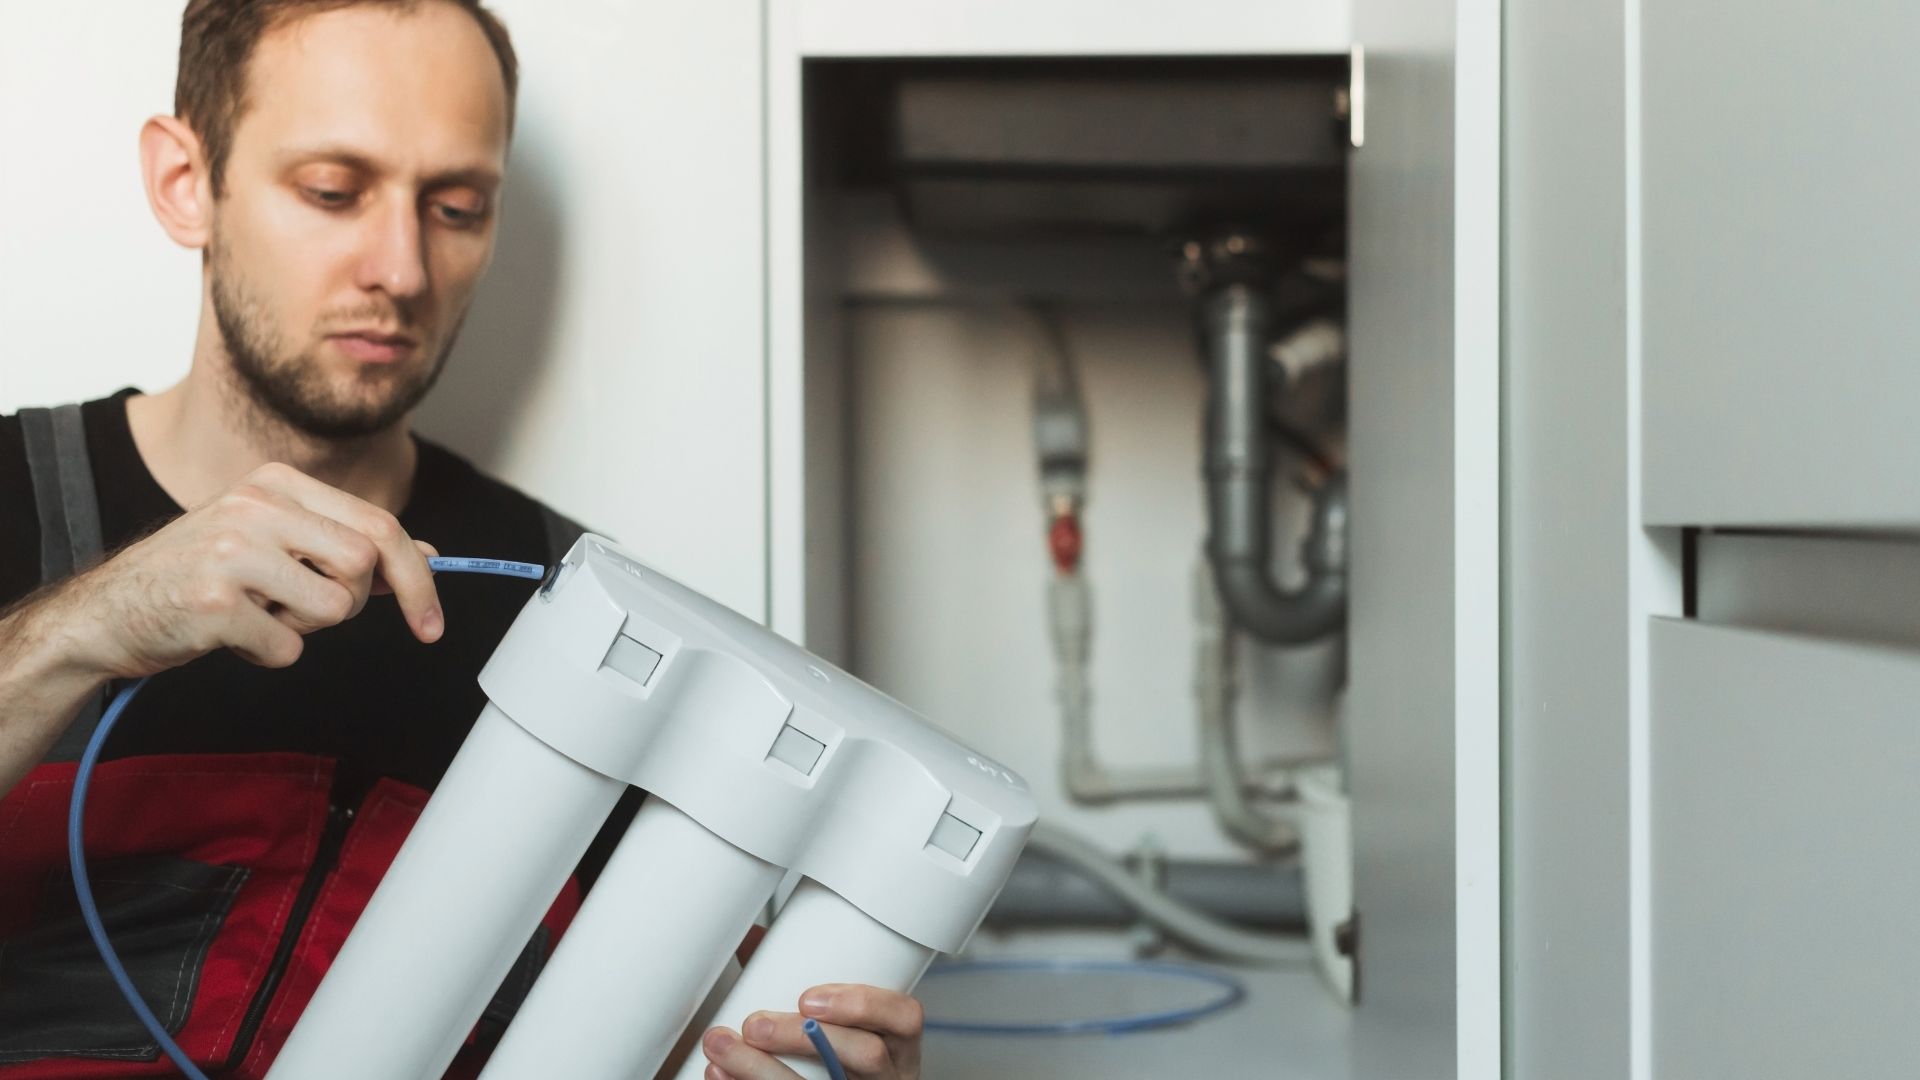 Delve into the advantages and disadvantages with insights from our expert plumbers